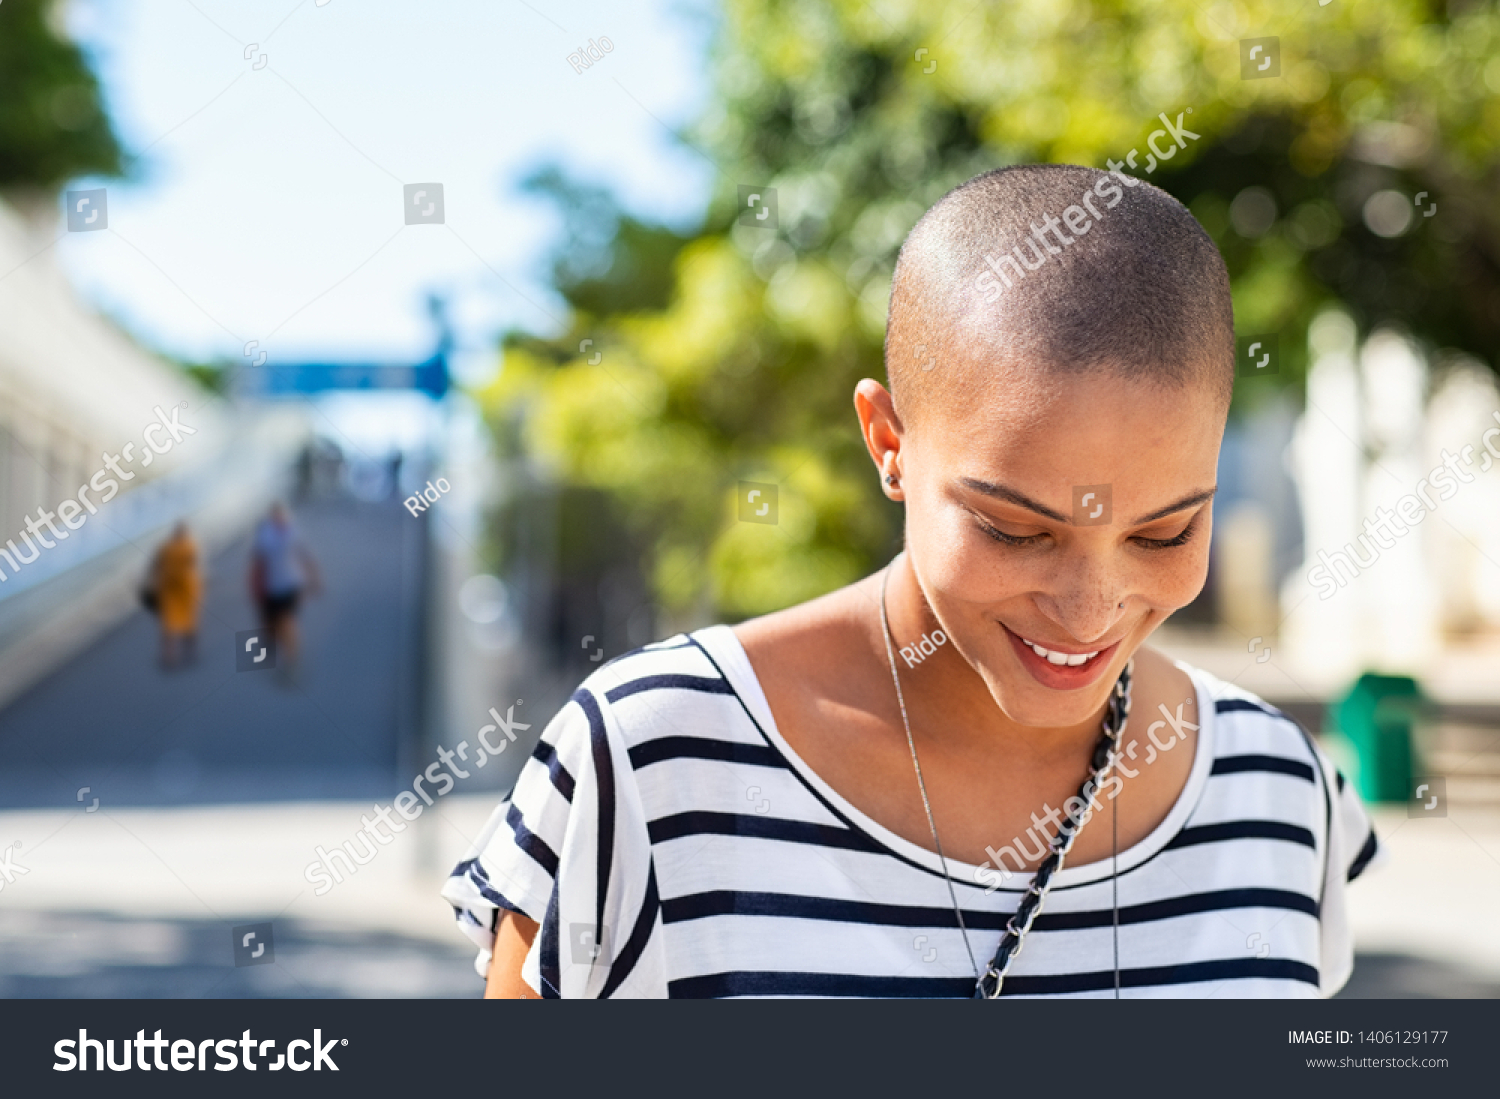 Portrait of happy and young bald woman smiling. Carefree trendy girl with bald head after cancer chemotherapy treatment. Stylish and beautiful woman feeling free in a city street. #1406129177